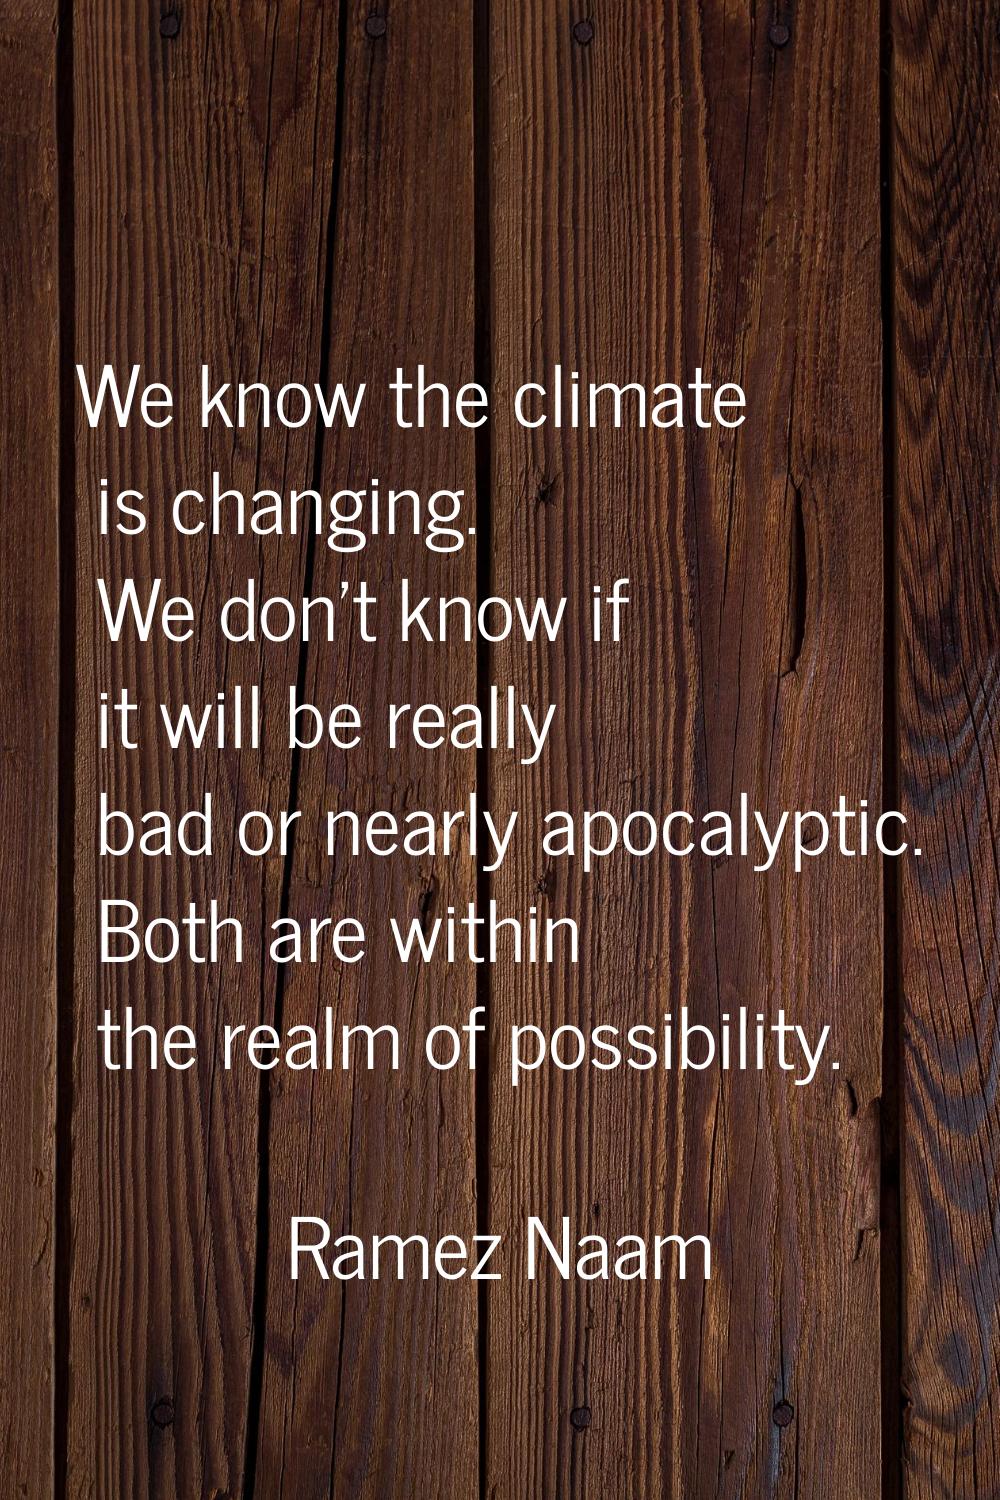 We know the climate is changing. We don't know if it will be really bad or nearly apocalyptic. Both